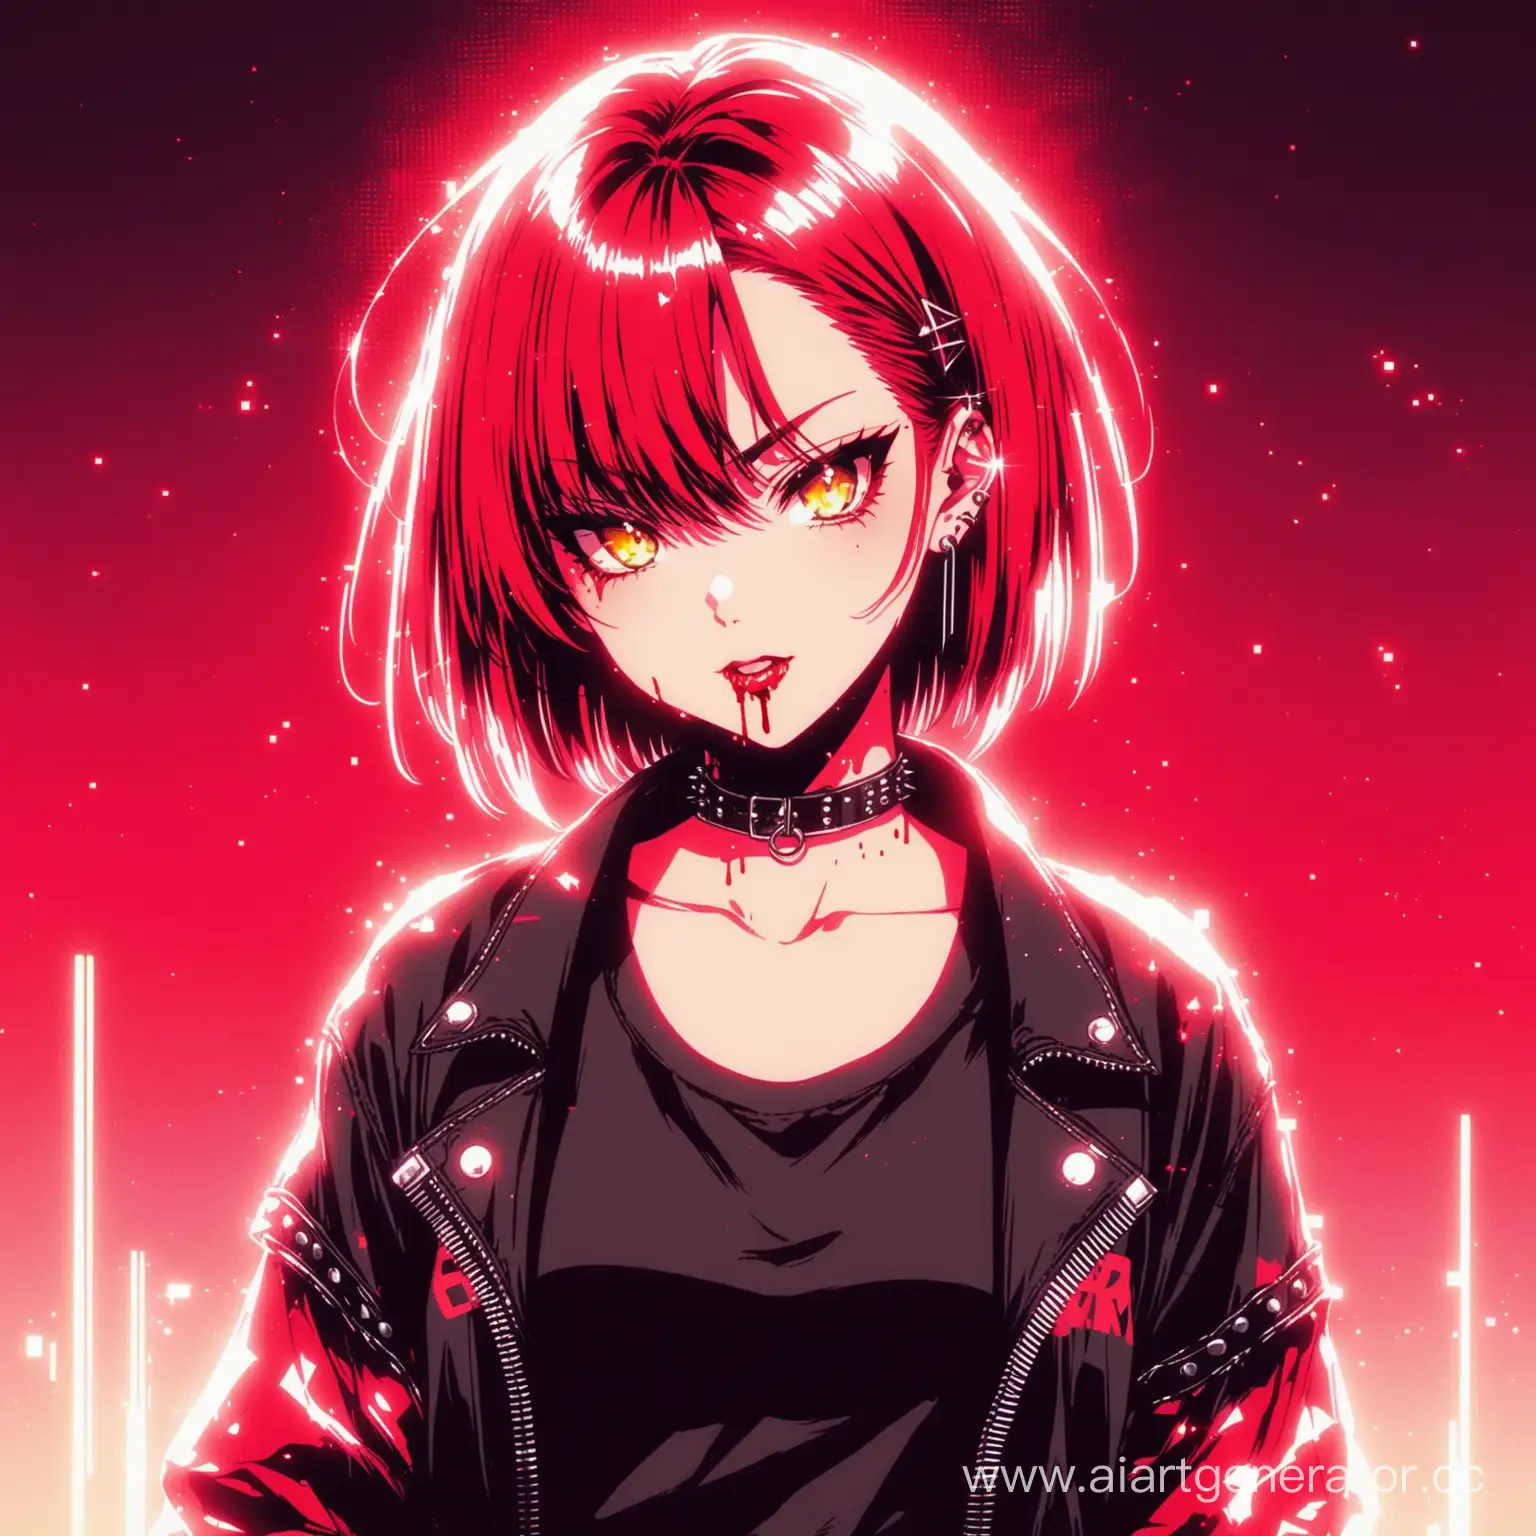 punk anime sexy girl, 90s style, blood, retro filter, glitch effects, sparkling highlights, red filter highlights, detail lights, 